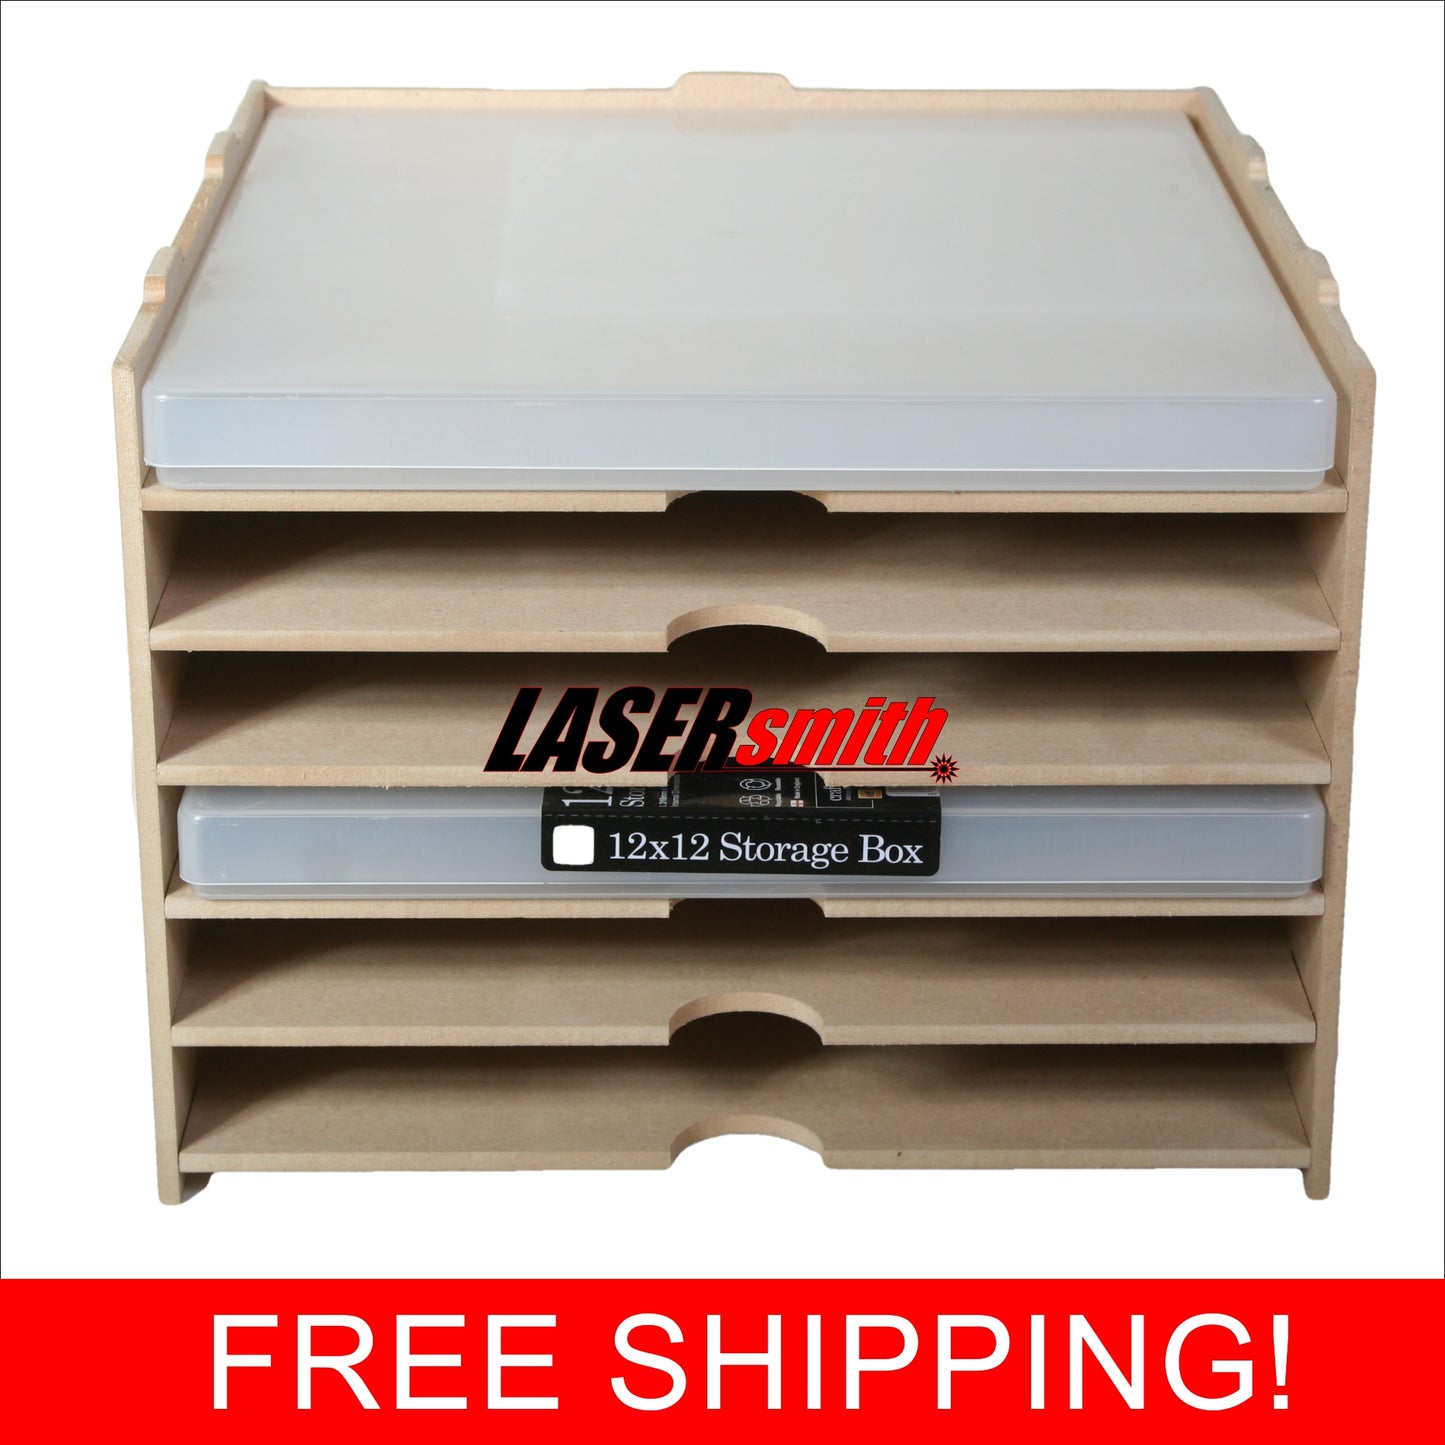 6 SHELF KALLAX STORAGE FOR 12 X 12 PLASTIC STORAGE CONTAINERS FOR CRAFTING AND OFFICE USE